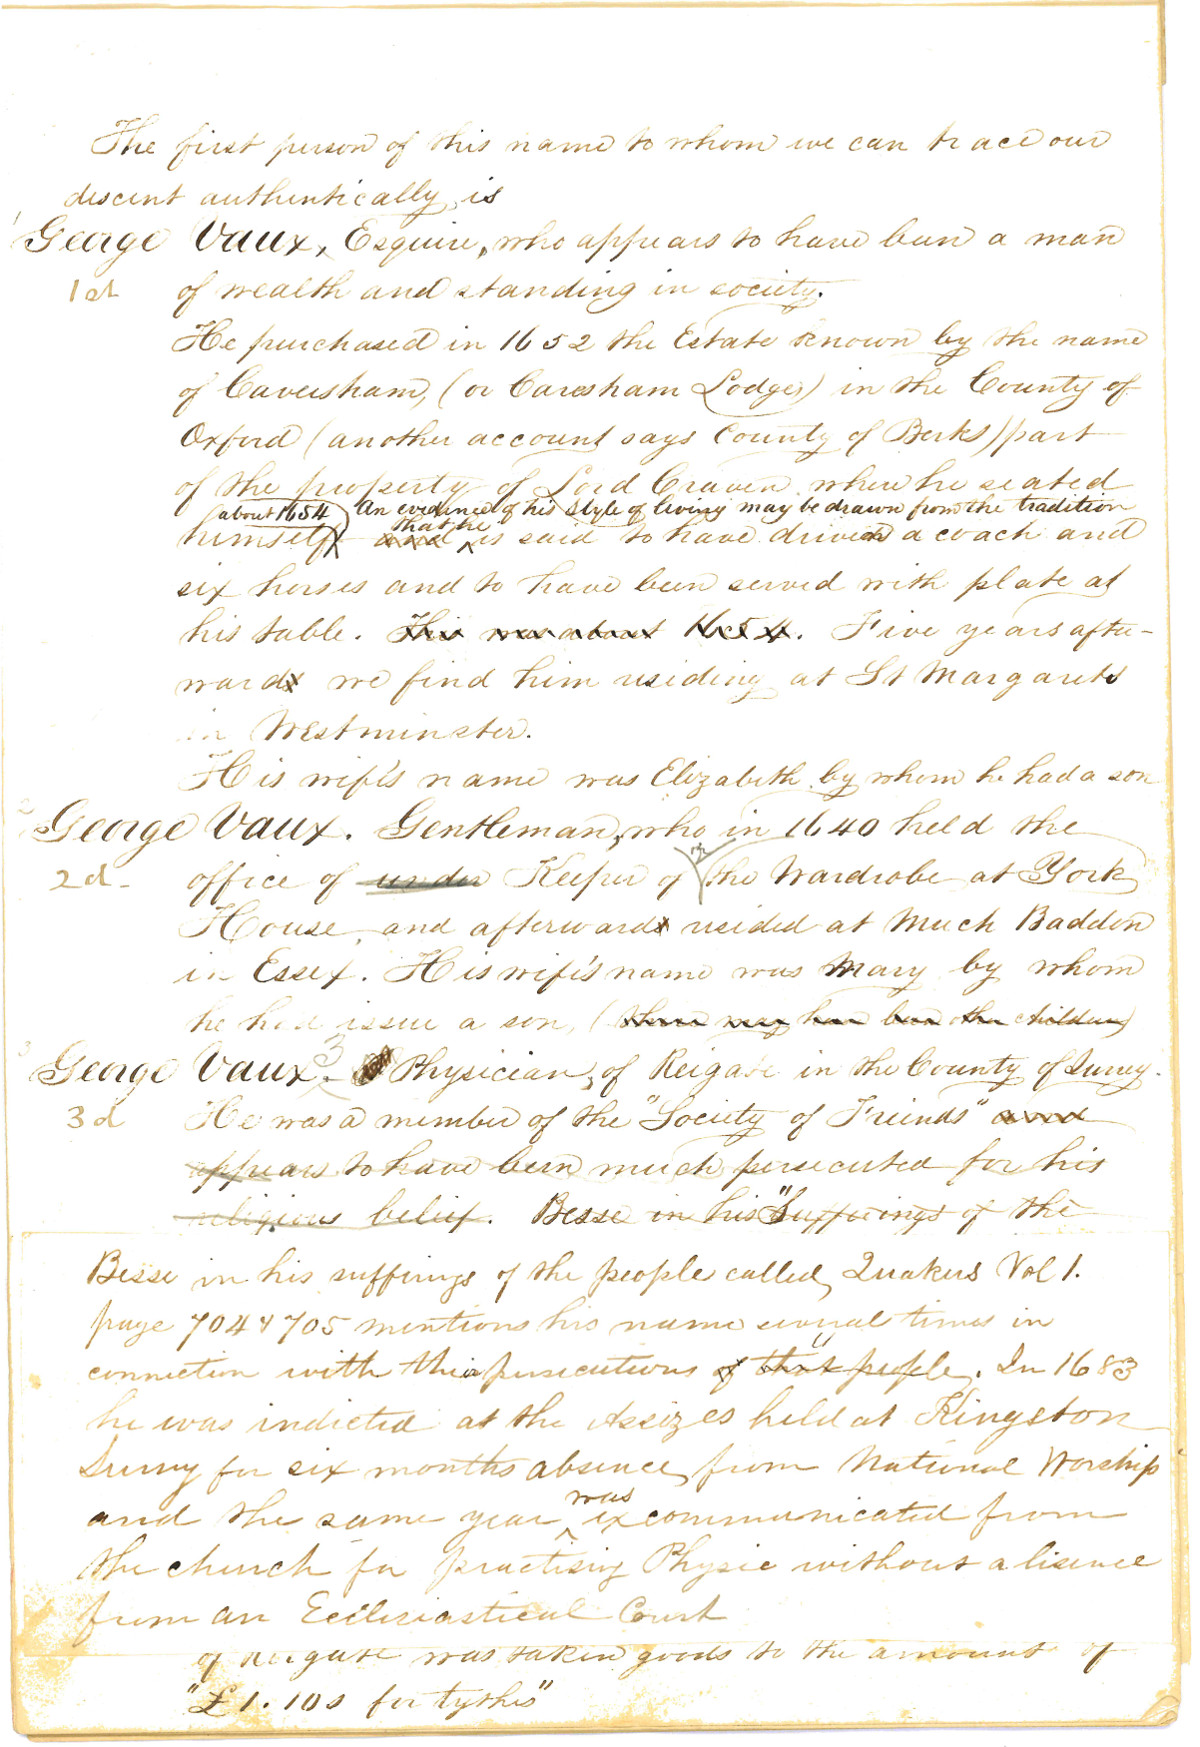 photo of manuscript that outlines a family history